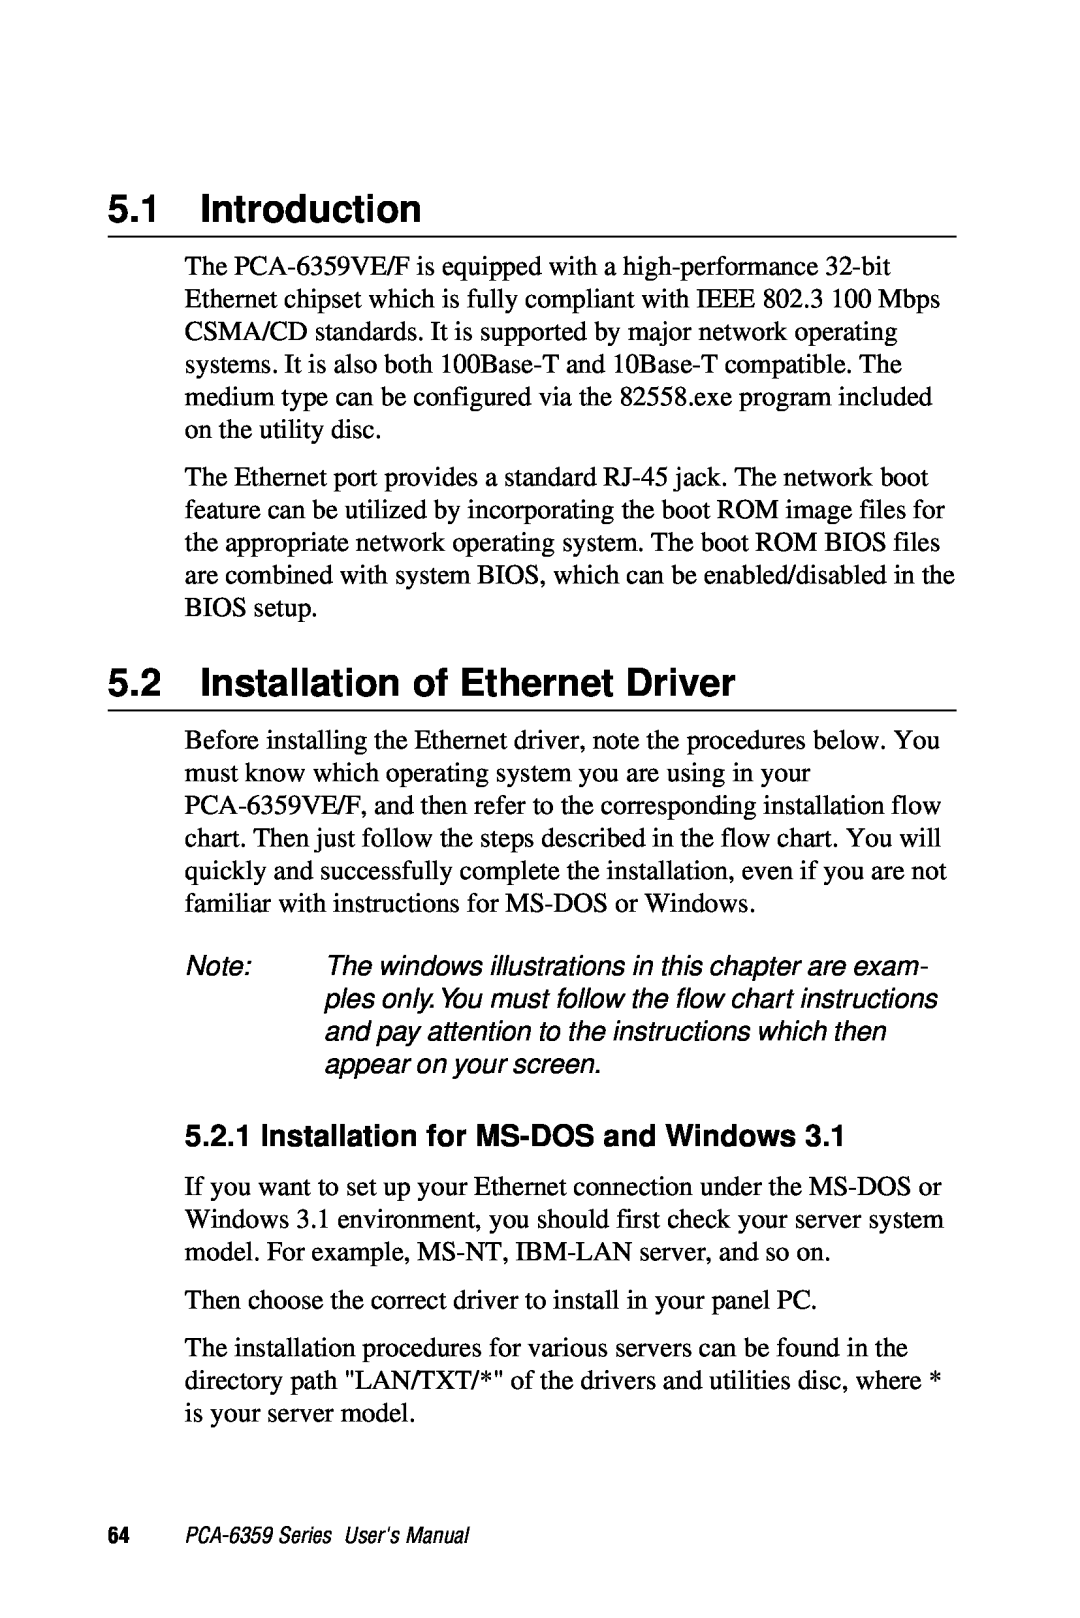 Advantech PCA-6359 user manual Introduction, Installation of Ethernet Driver, Installation for MS-DOS and Windows 